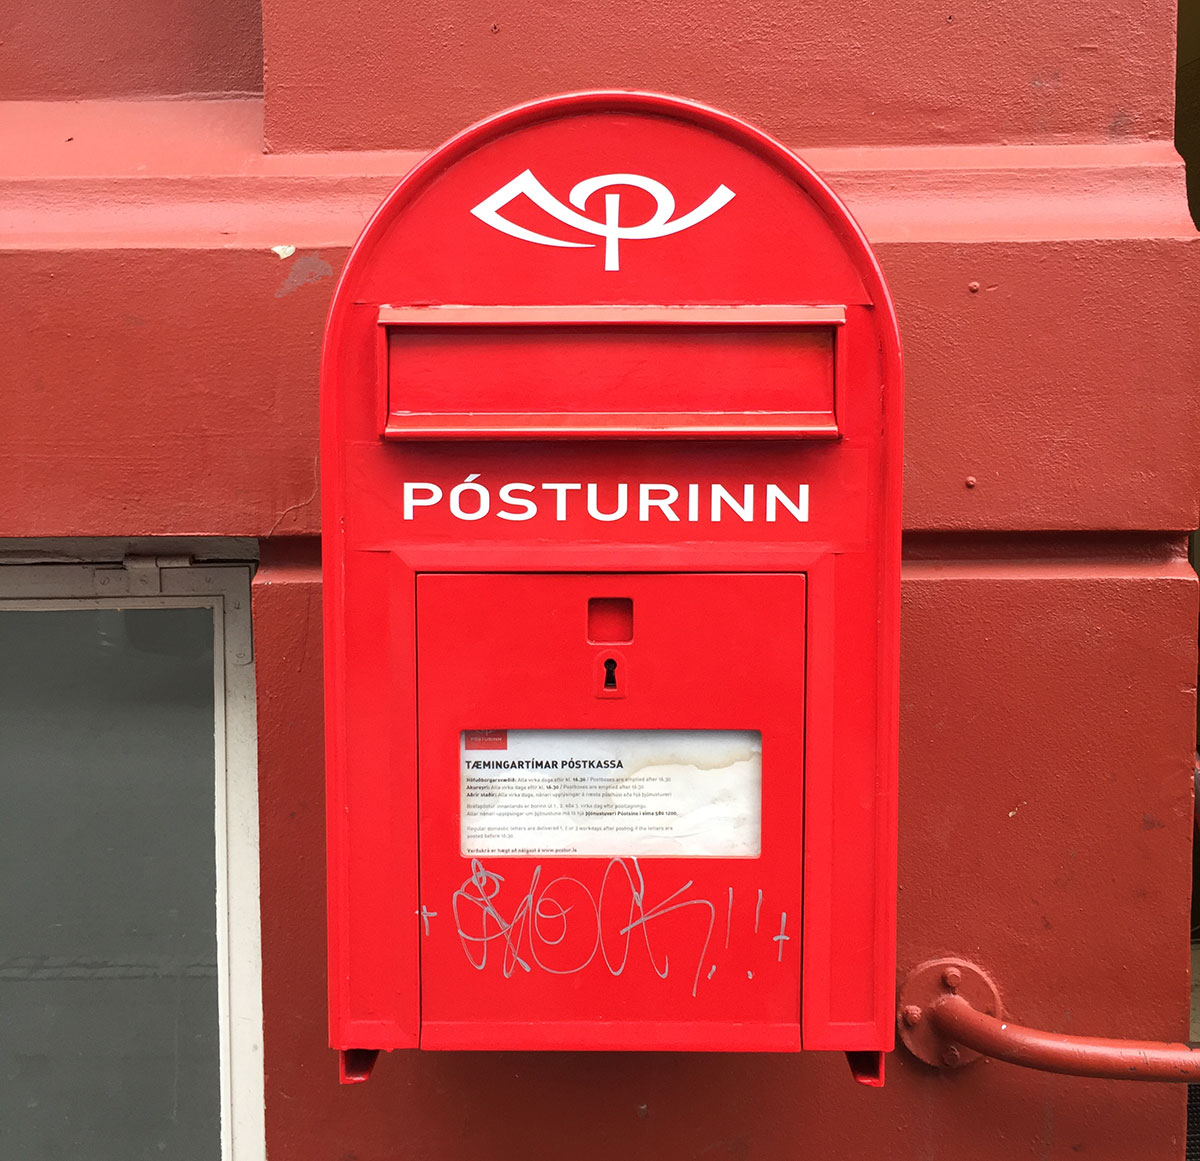 A red letterbox for the postal system in Iceland